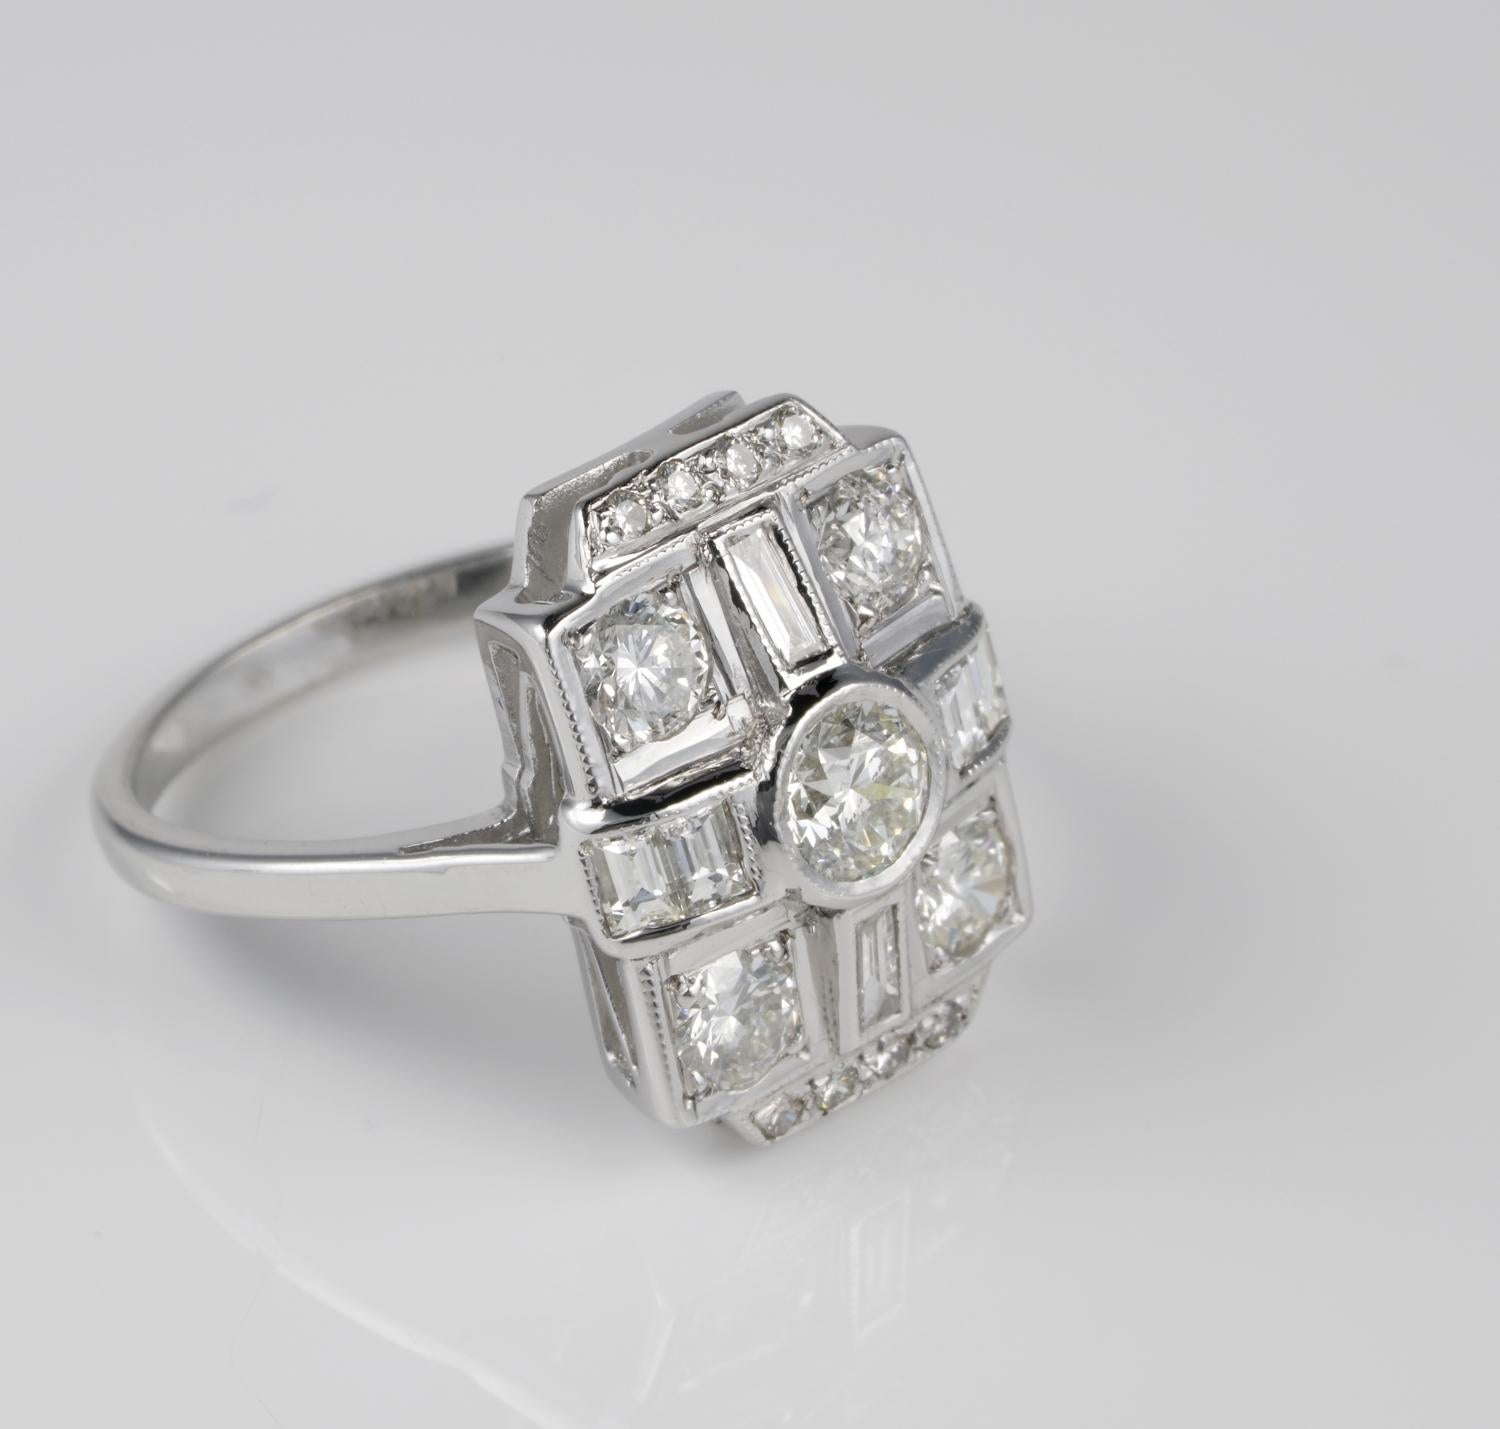 Supreme Sparkle!

 mid century vintage ring very much Art Deco inspired in style
Superbly hand crafted of solid 18 KT white gold in fantastic, impressive design articulated with rich Diamond setting, comprising a selection of various different cuts